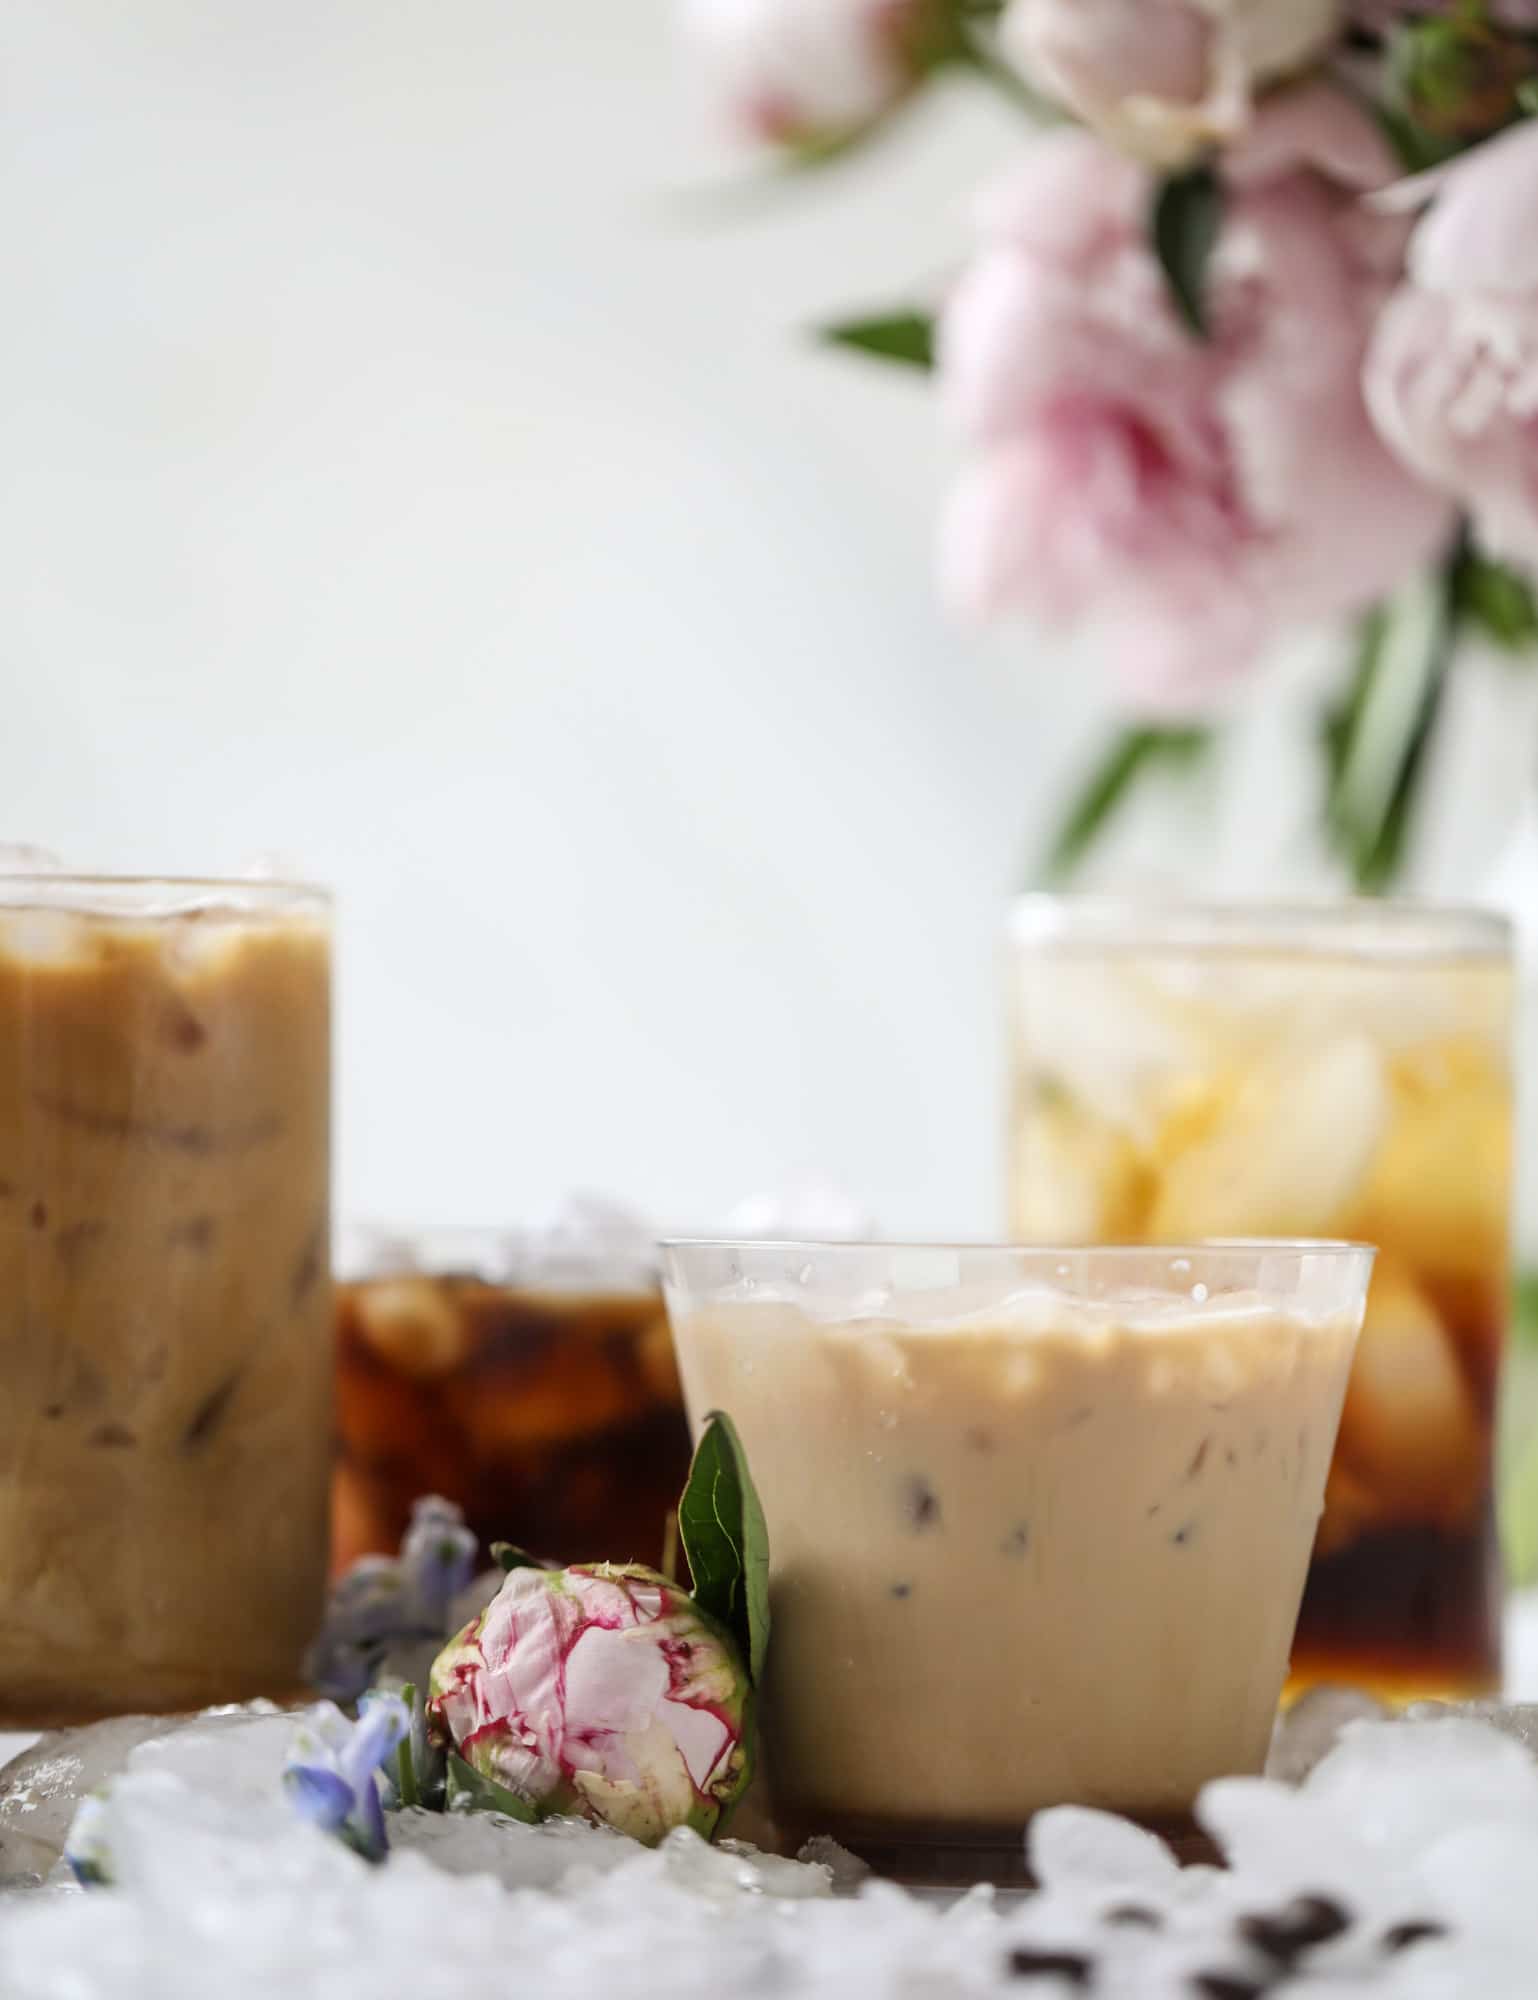 This iced coffee soda is so perfect for summer! Rich coconut syrup, cold brew coffee, cream (or coconut cream!) if you'd like it and lots of bubbly soda. Tastes refreshing, feels like a cocktail and still gives you a pick-me-up! I howsweeteats.com #iced #coffee #soda #coconut